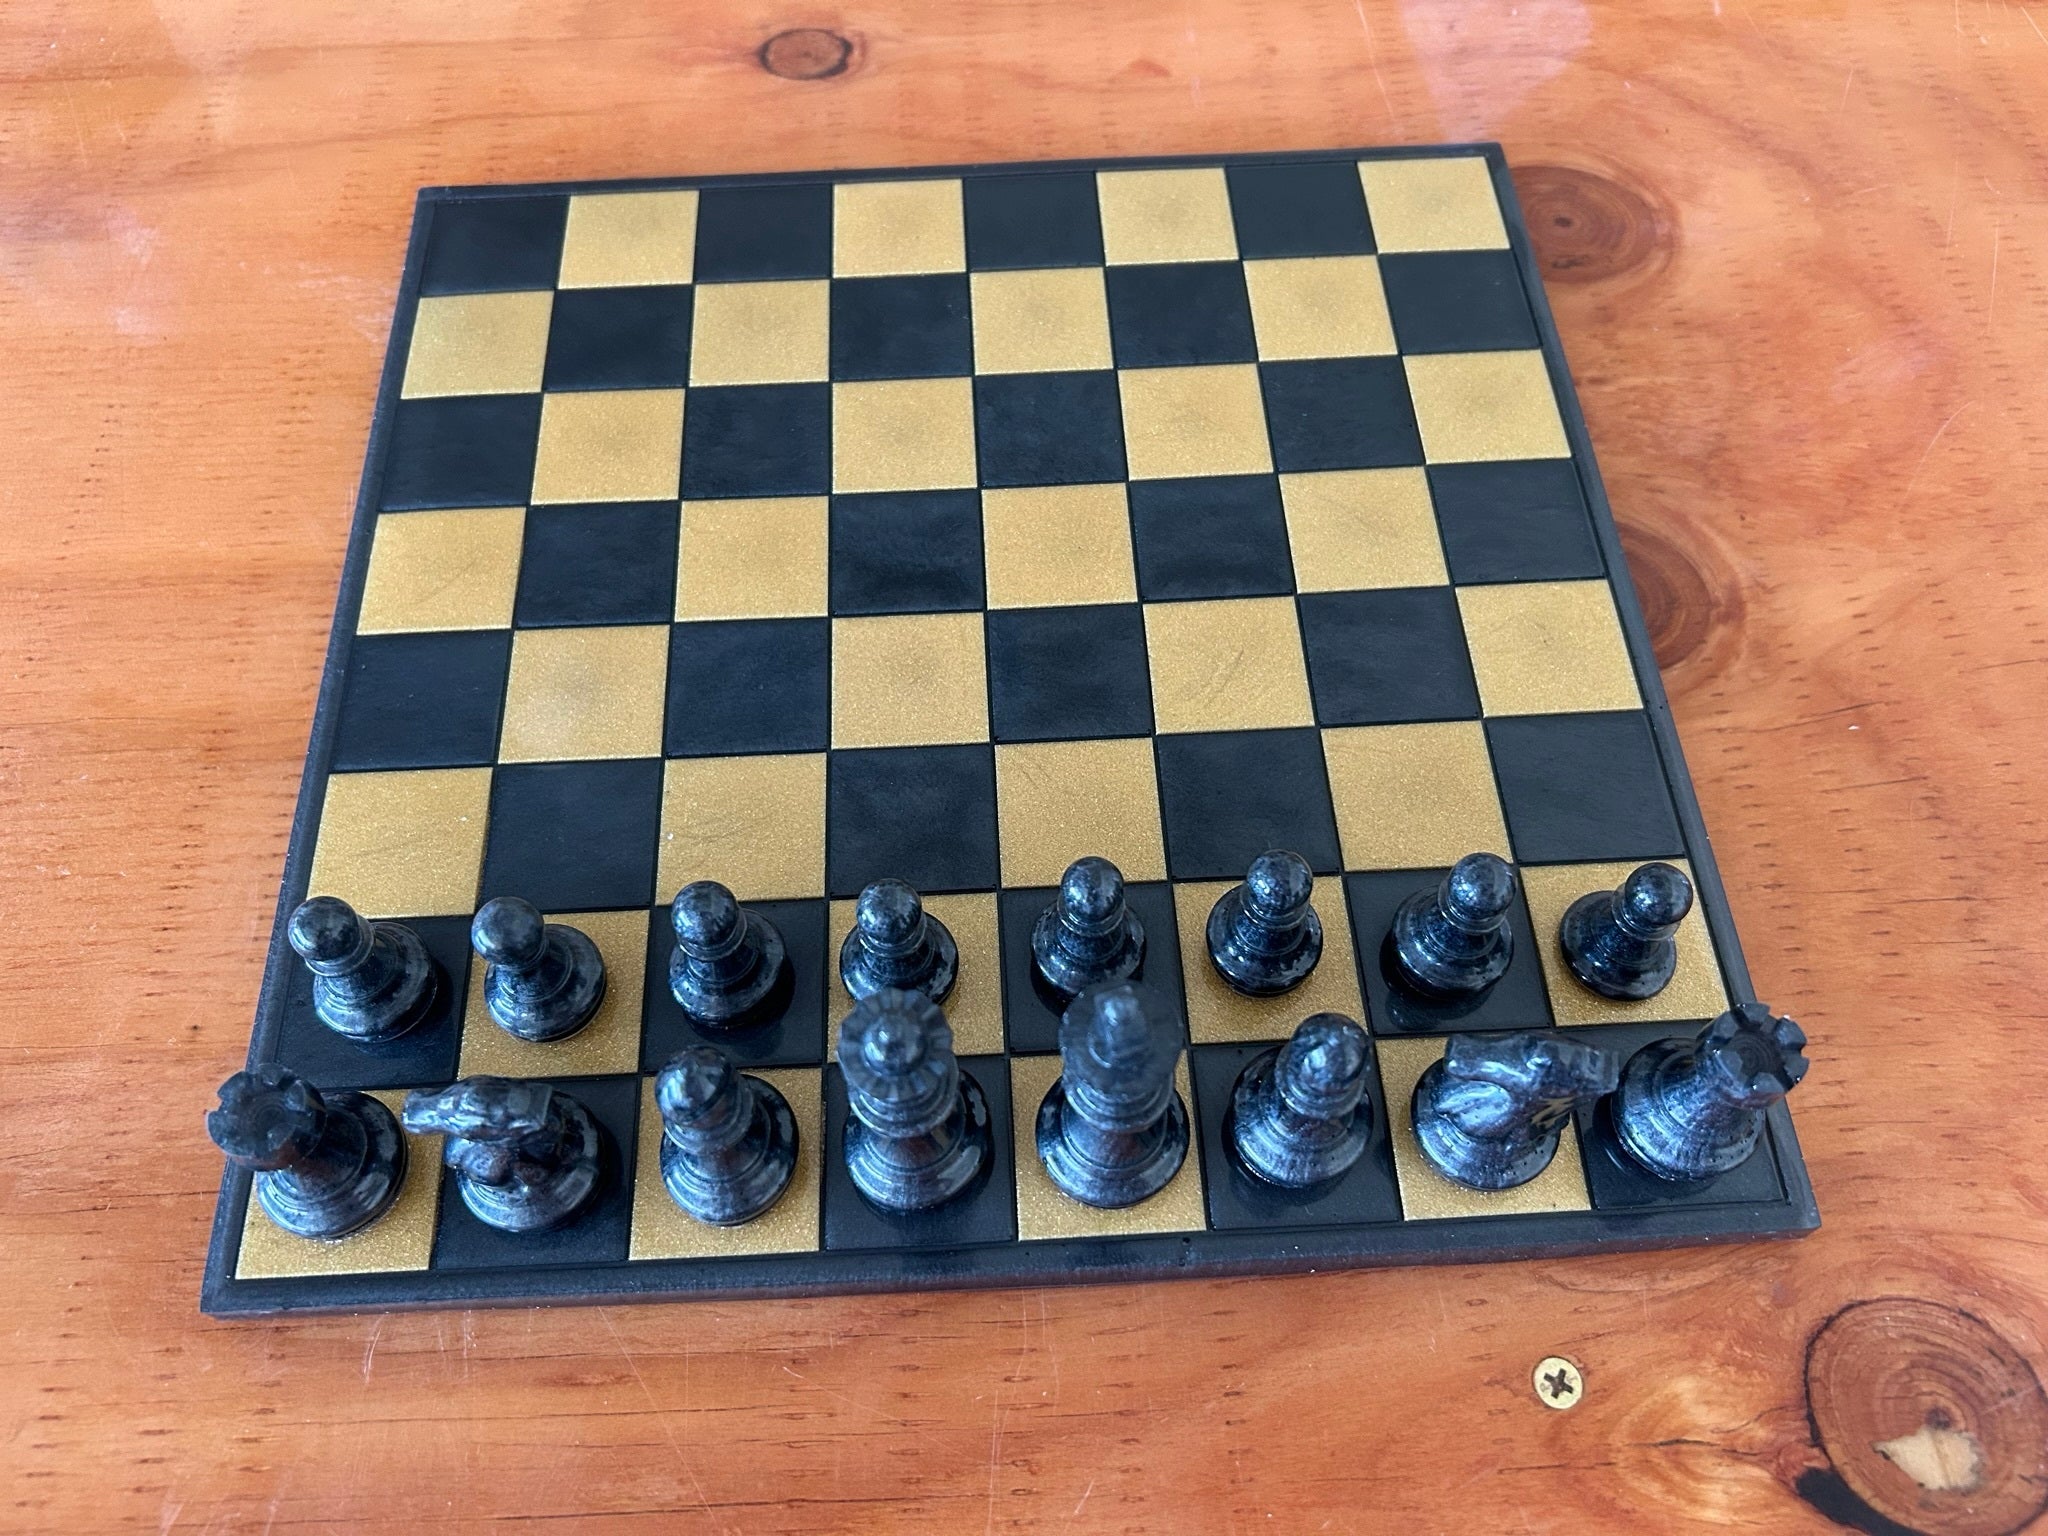 CHESS STRATEGY, RULES & SETUP- LAMINATED - A MUST HAVE FOR ANY